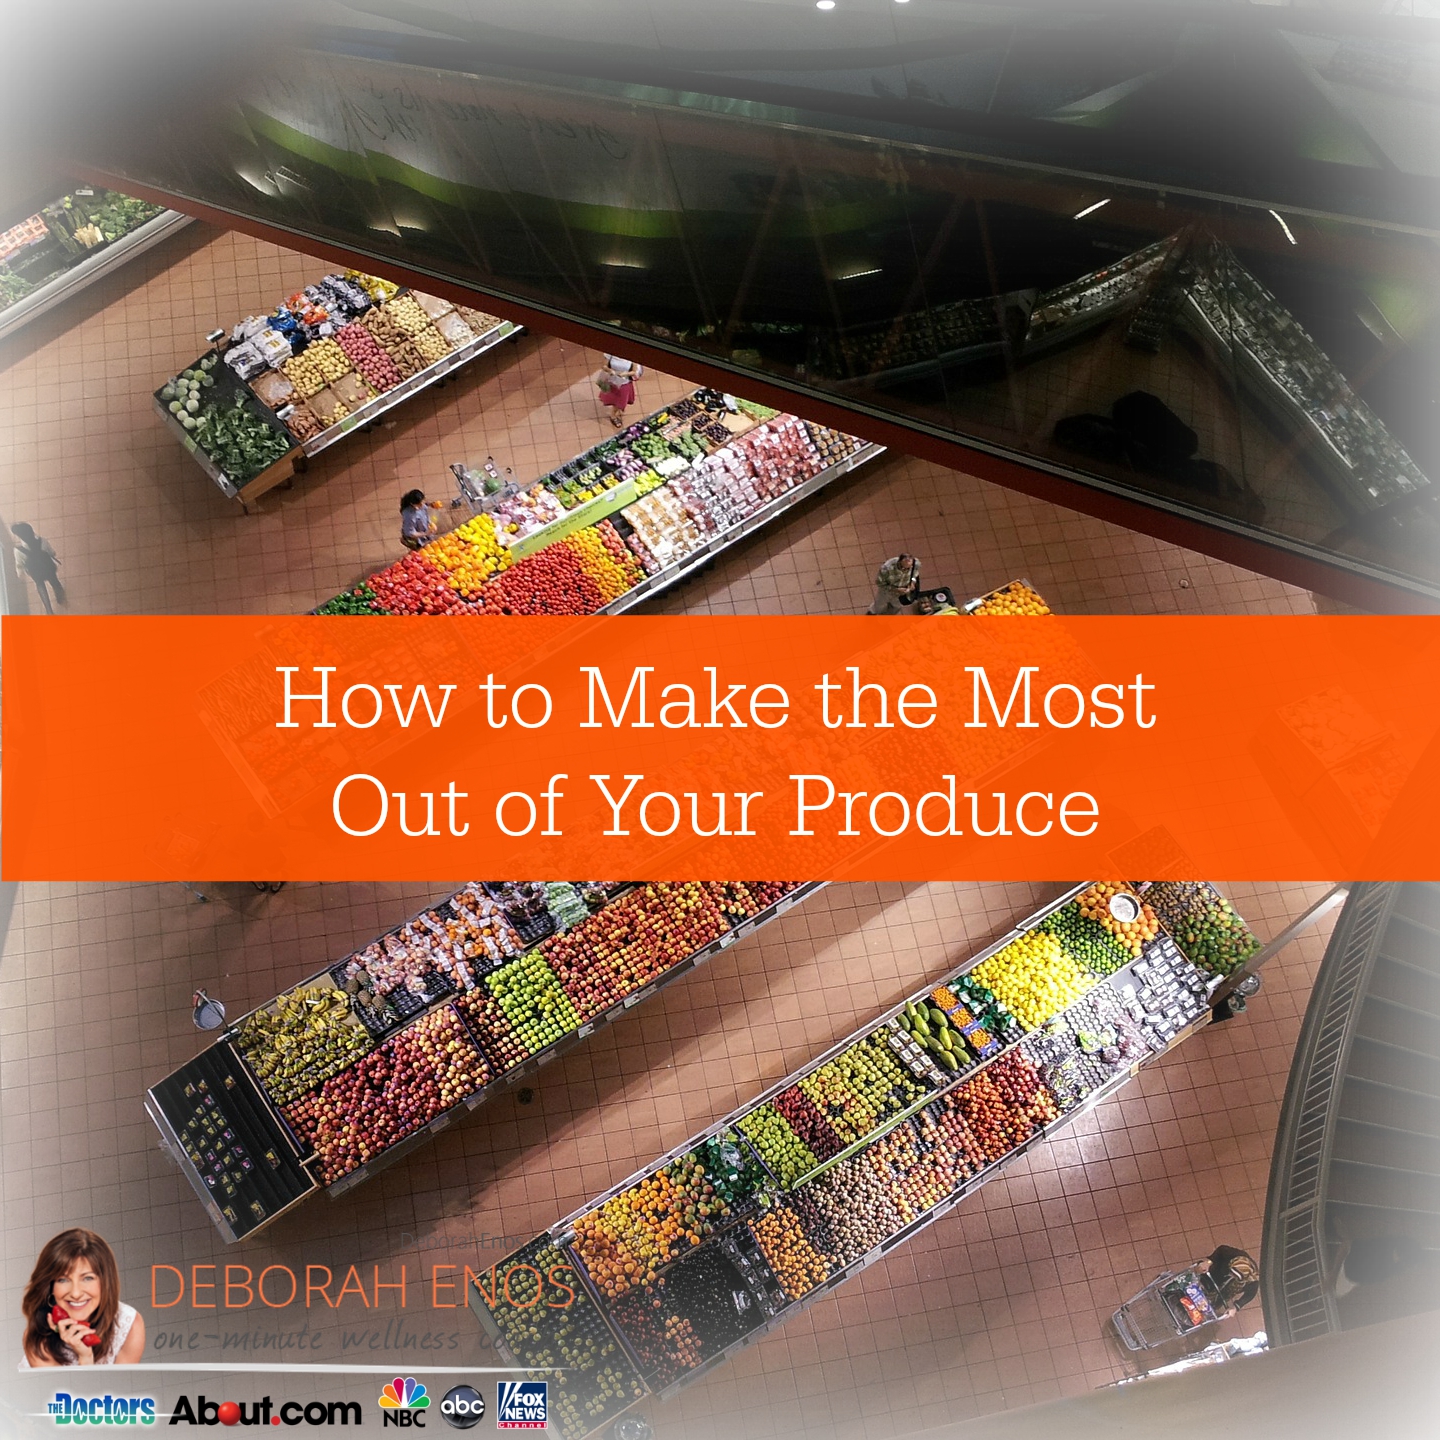 How to Make the Most Out of Your Produce